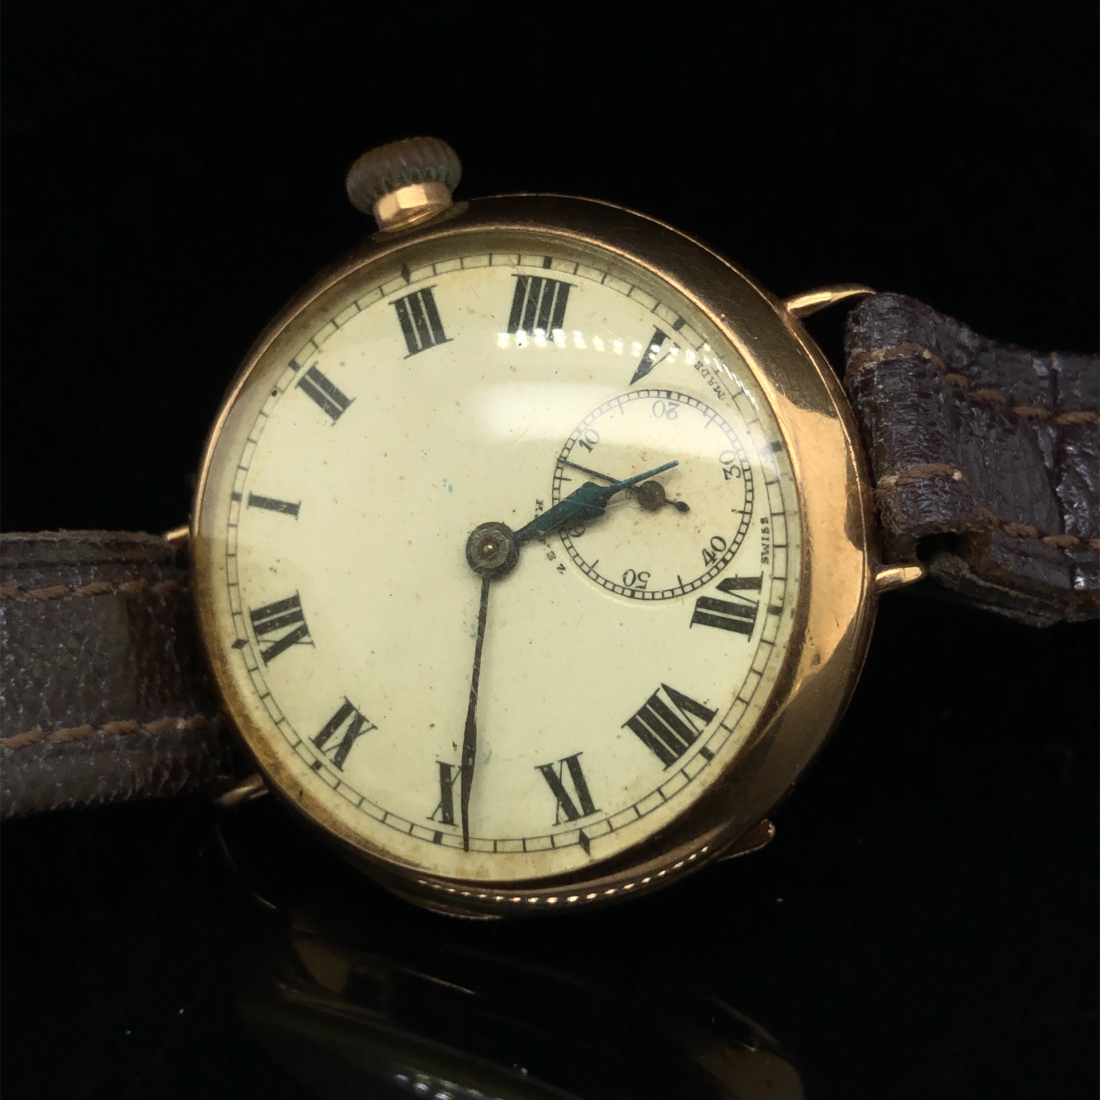 AN ANTIQUE 18ct HALLMARKED GOLD ZENITH WATCH REF NUMBER 2314145, ON A BROWN LEATHER REPLACEMENT